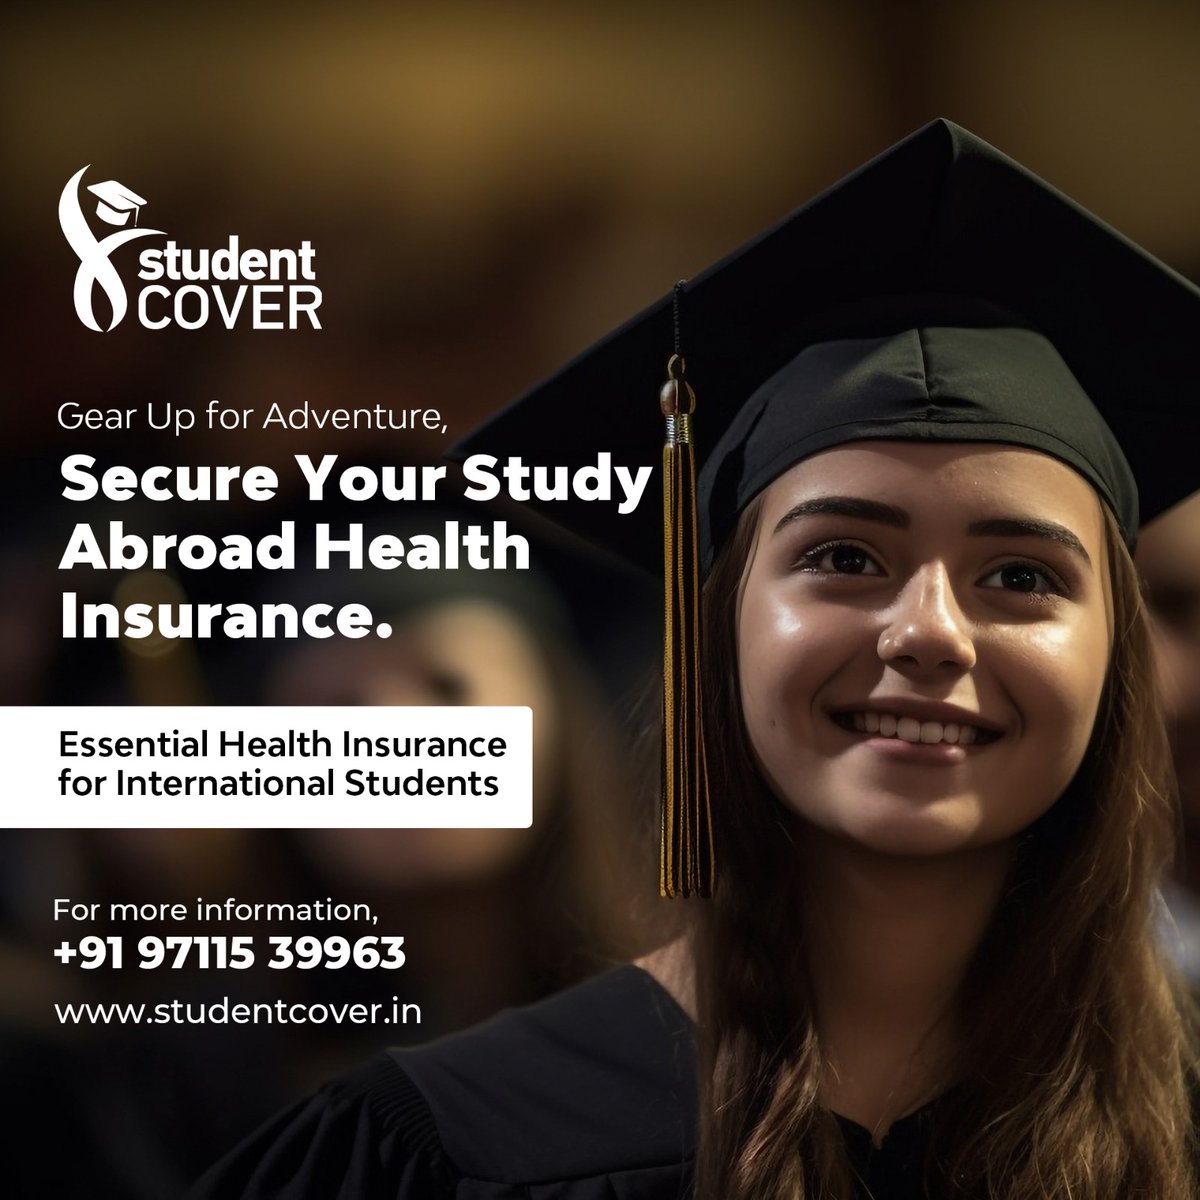 Gear Up for Adventure, Secure your study abroad health Insurance. 

#studyabroad #studentcover #healthinsurance #internationalstudents #studentshealthinsurance #healthinsuranceforstudents #abroadhealthinsurance #securehealth